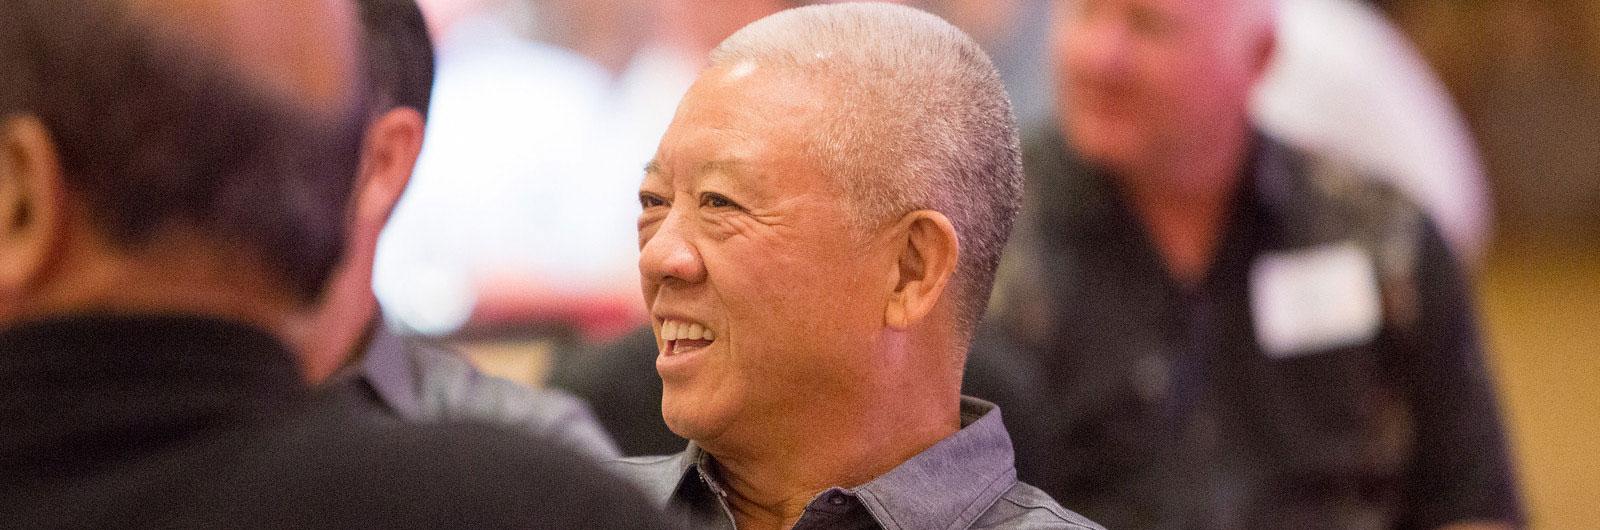 Andrew Cherng